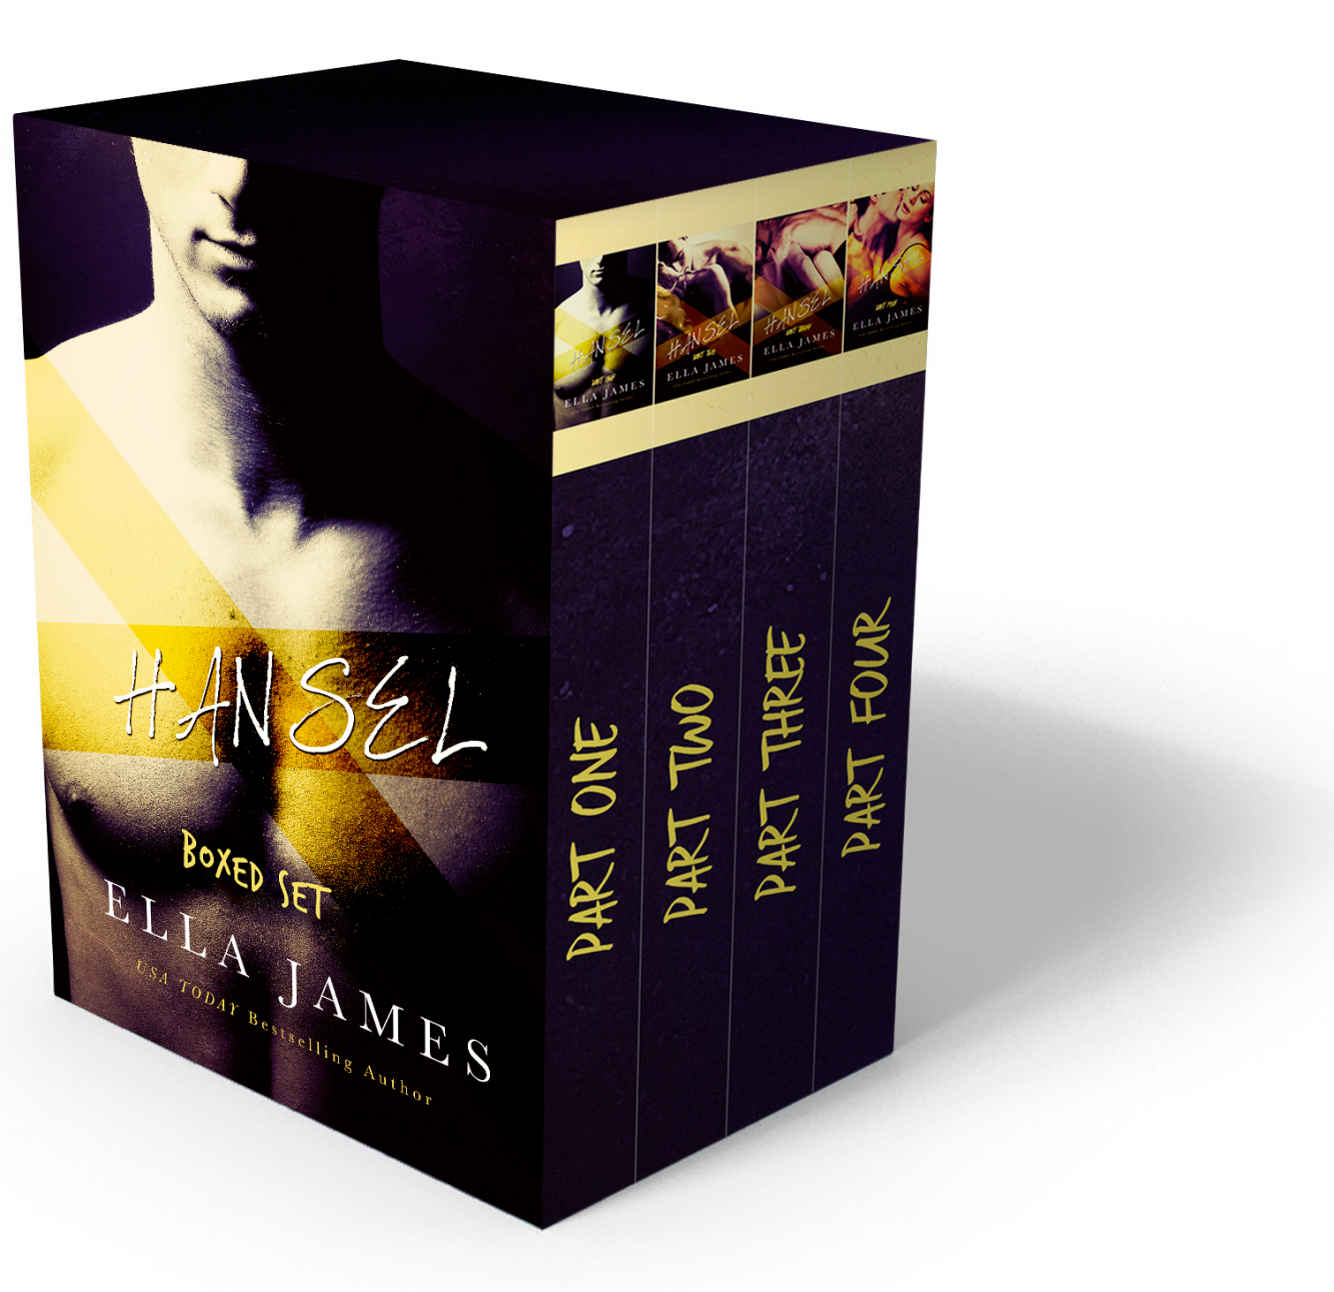 Hansel 1-4: The Complete Series by Ella James